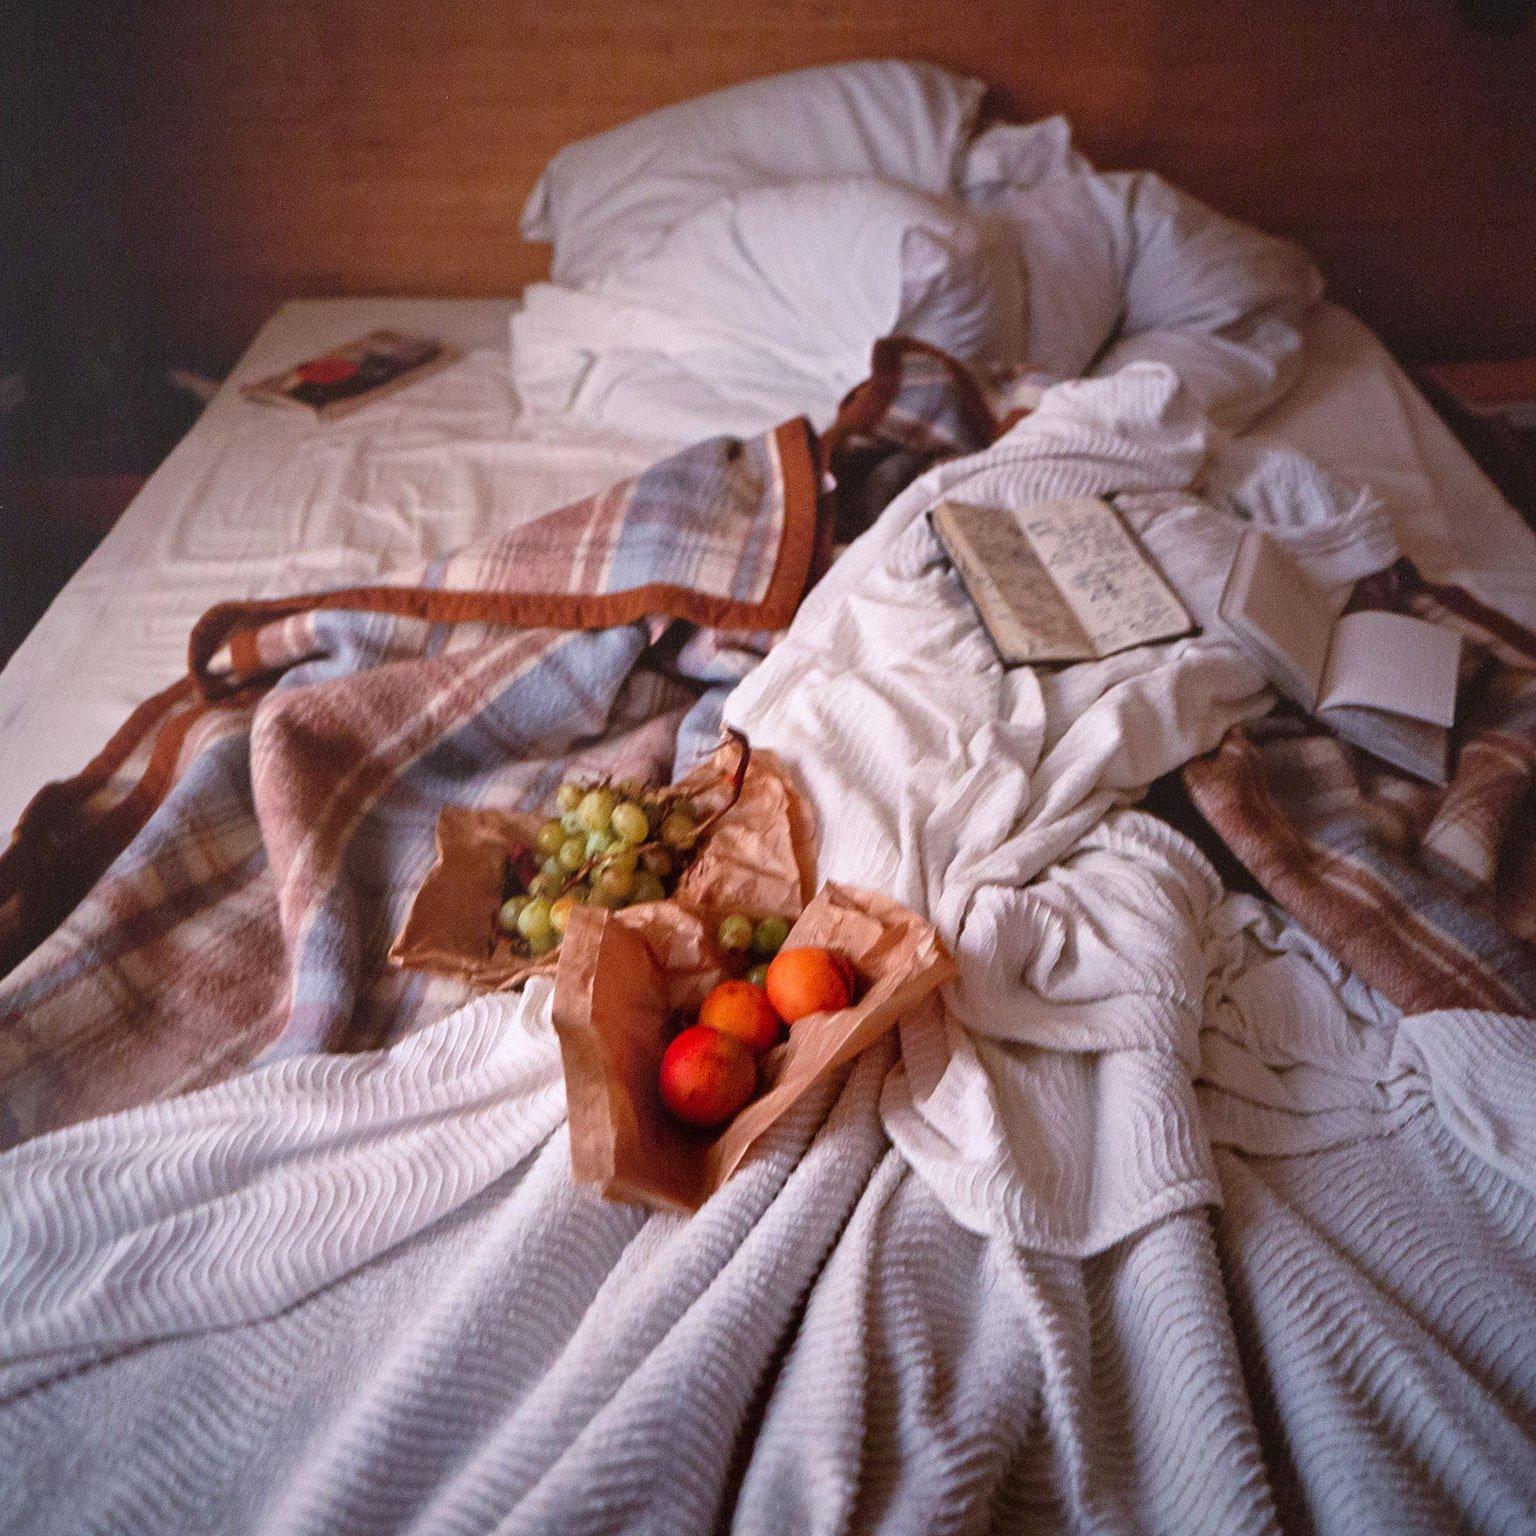 Nan Goldin (b. 1953) is one of the most influential, yet arguably underrated, photographers of the 20th century. Beginning in the 1970's Goldin took candid shots of her friends and lovers, characters often living on the margins of society. Following